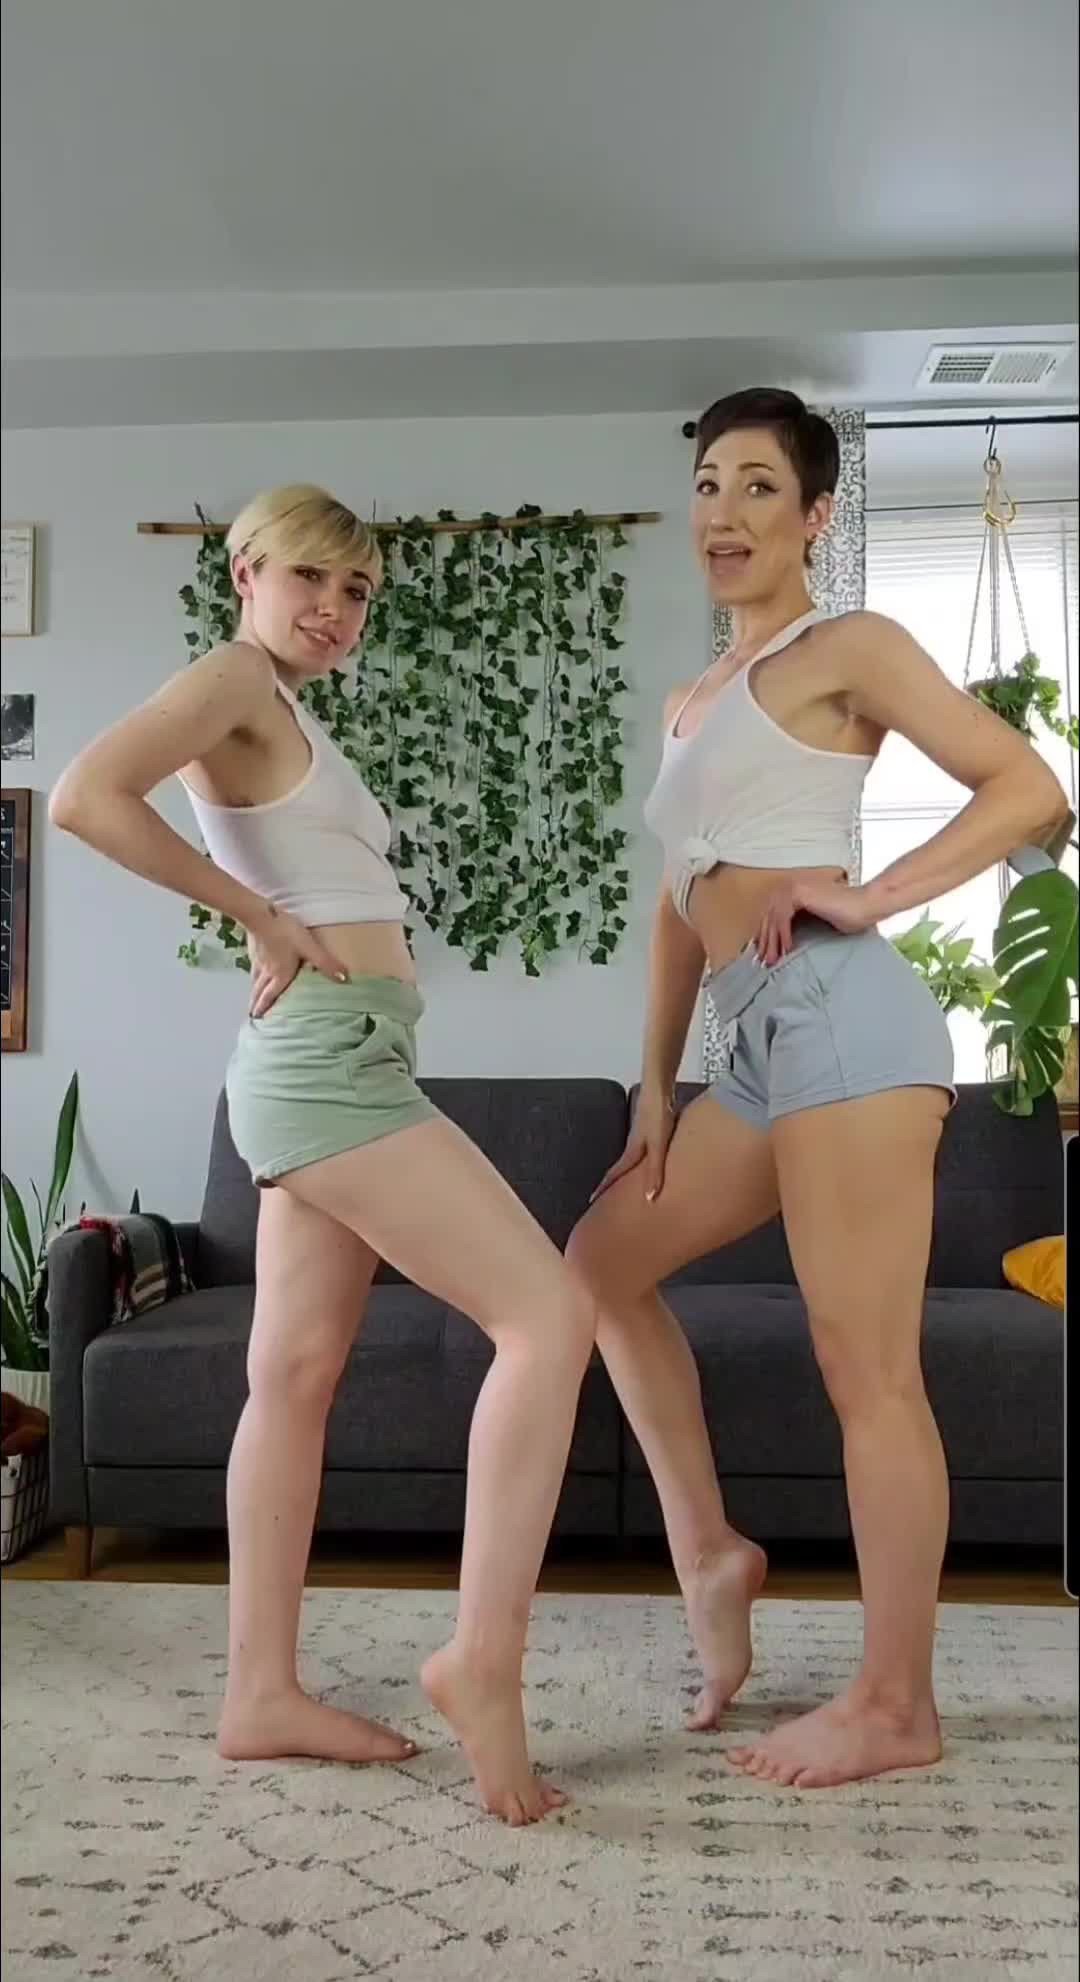 Video post by Angel Amour